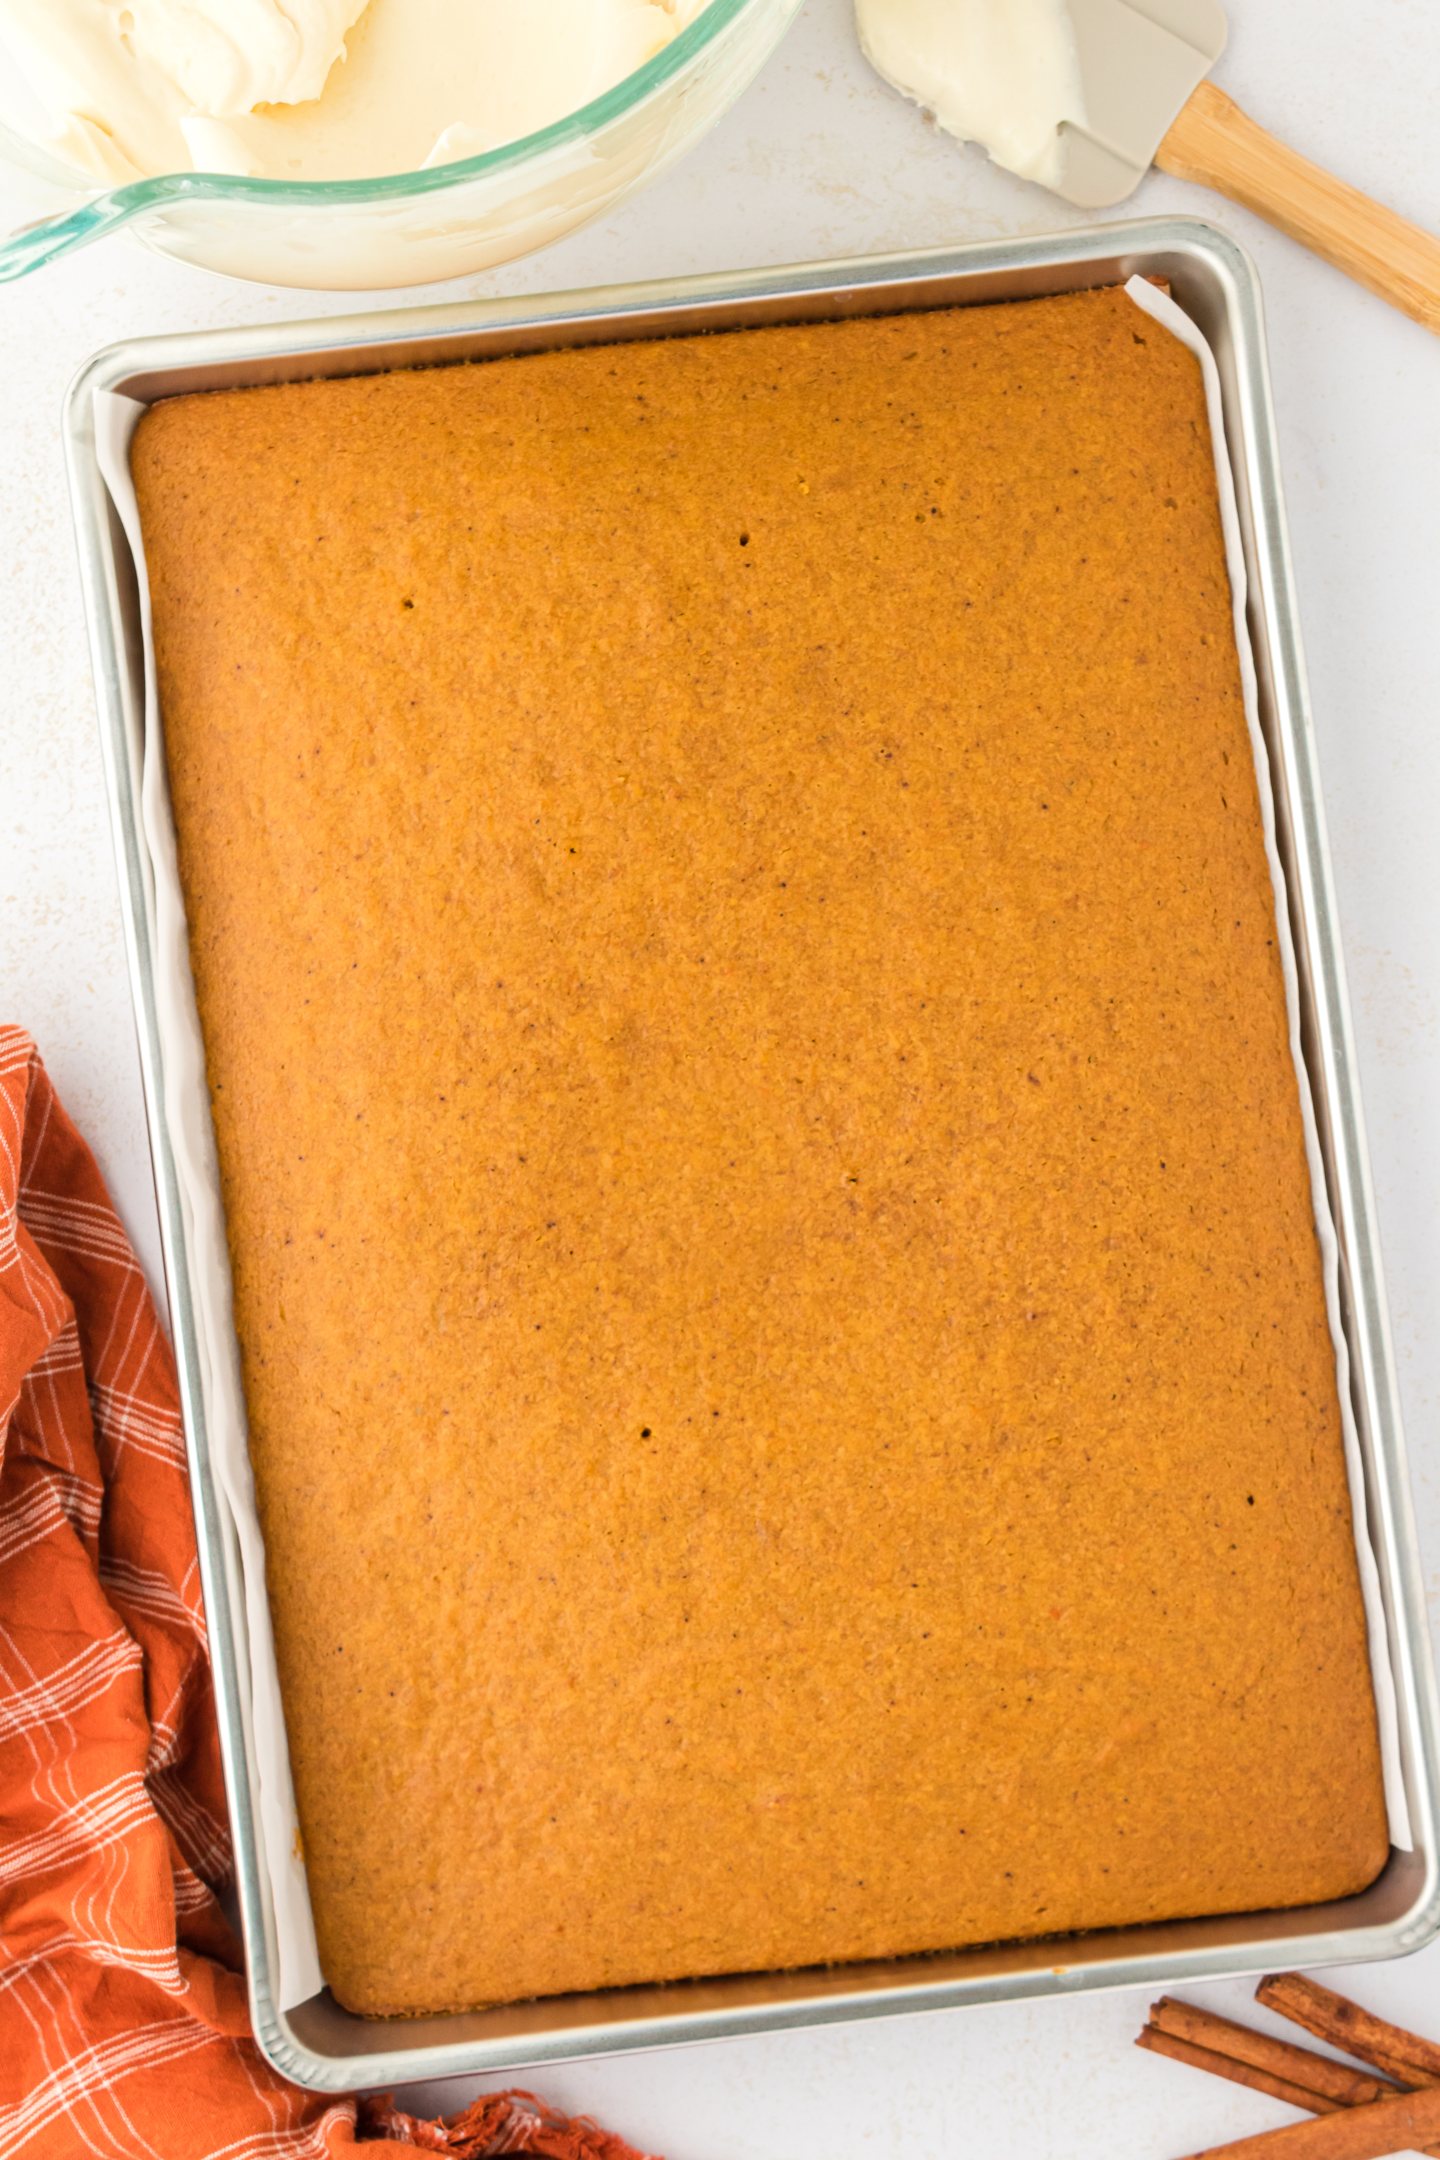 baked pumpkin bars with no frosting on them into prepared baking dish on a wire rack